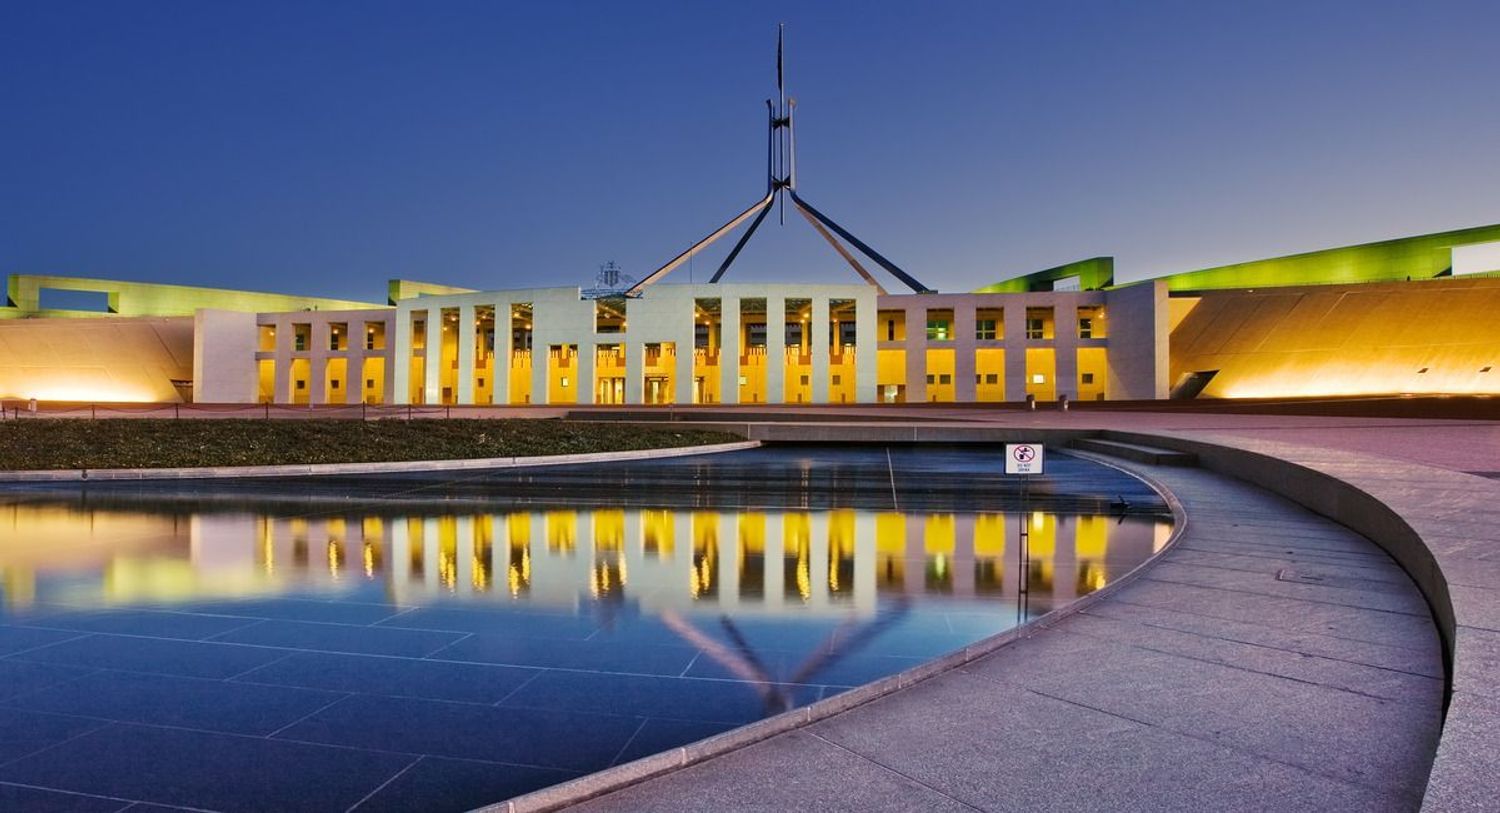 Australia's Federal Parliament in Canberra brightly lit at night